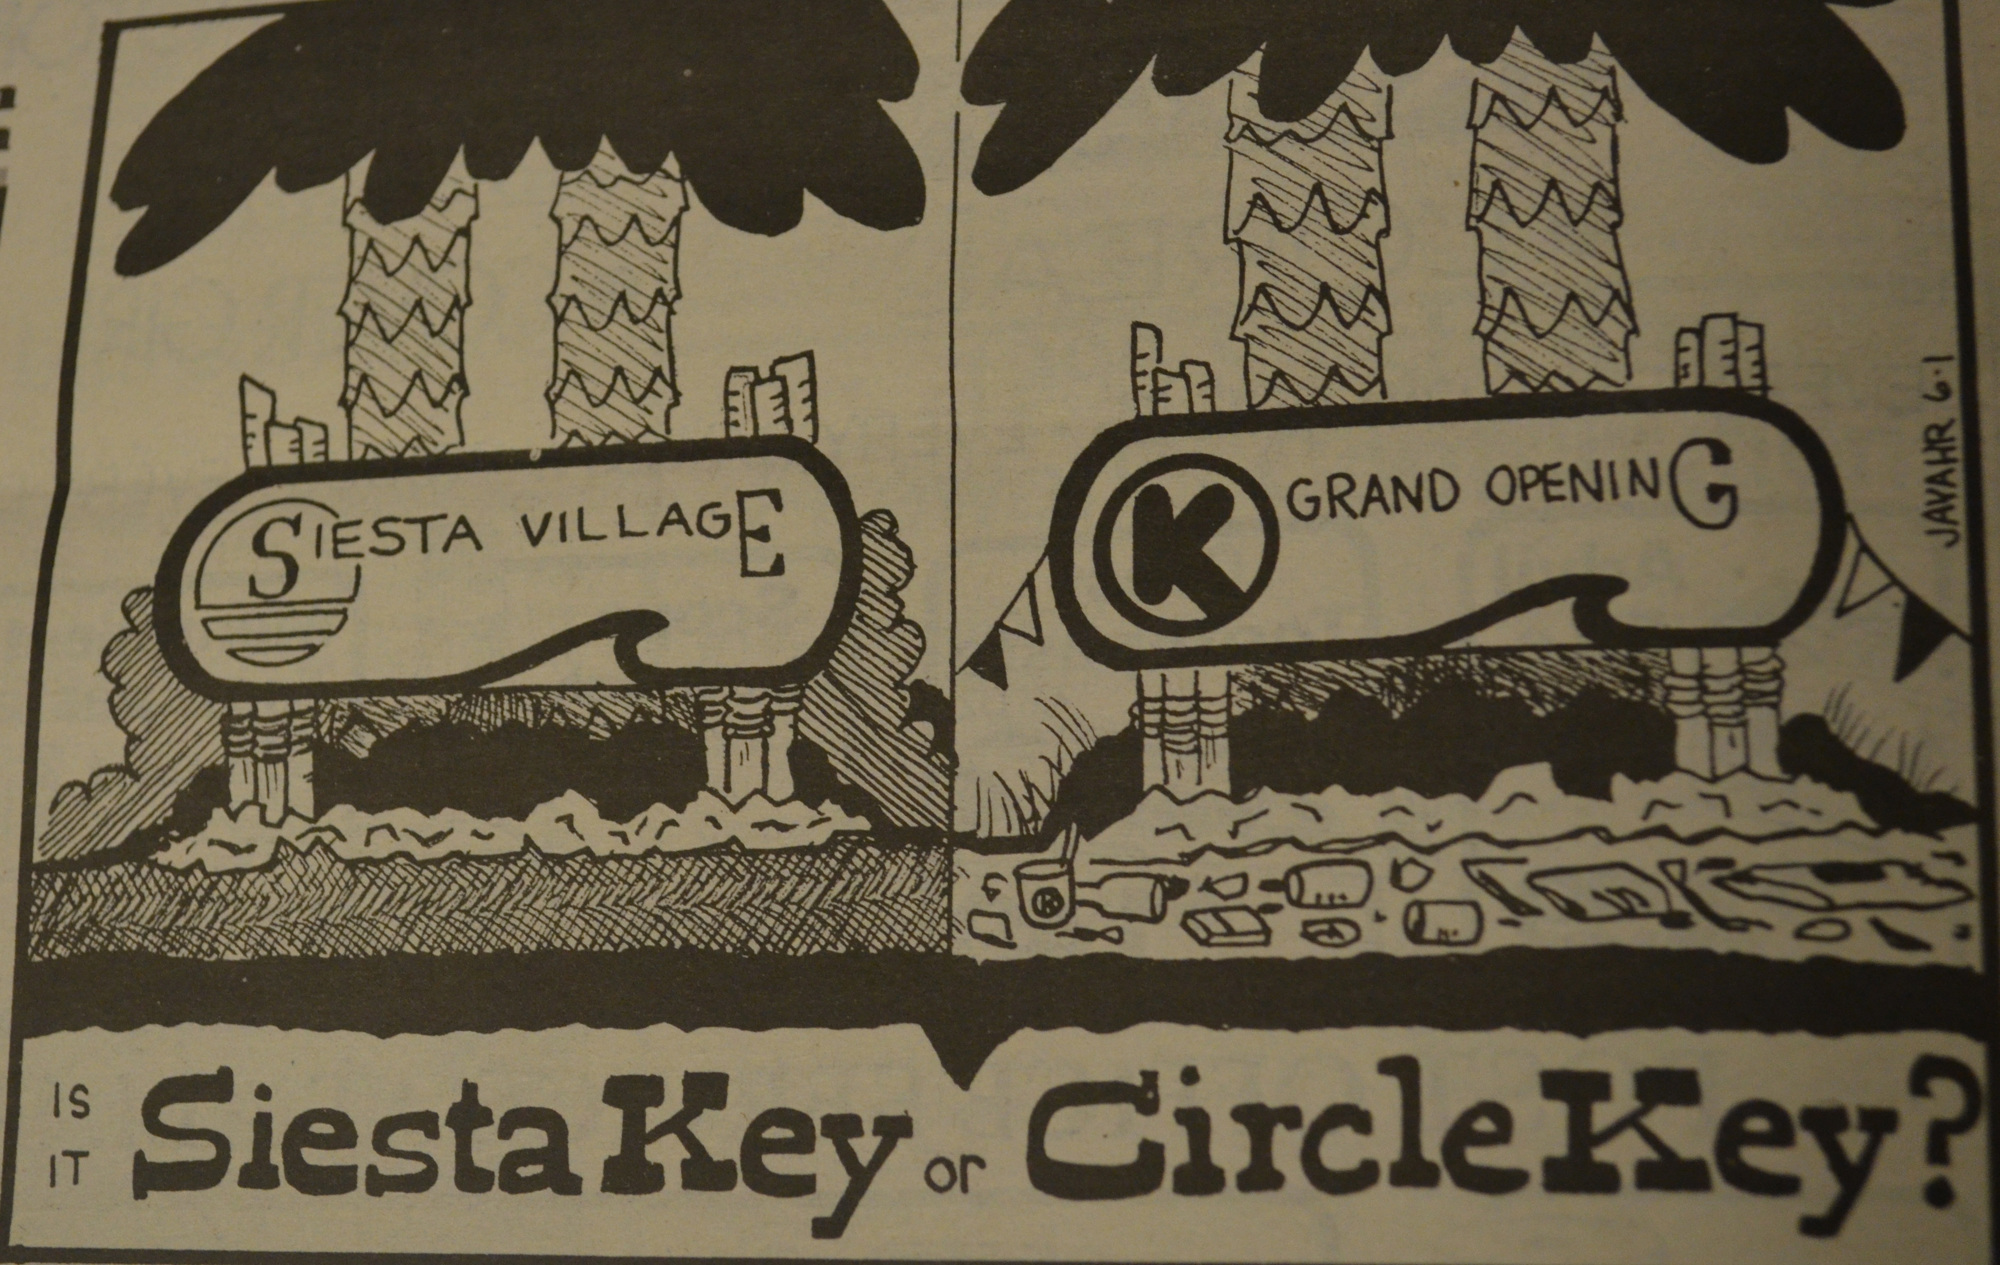 This cartoon ran with the editorial questioning the efforts of the new Circle K to fit in to Siesta Village.